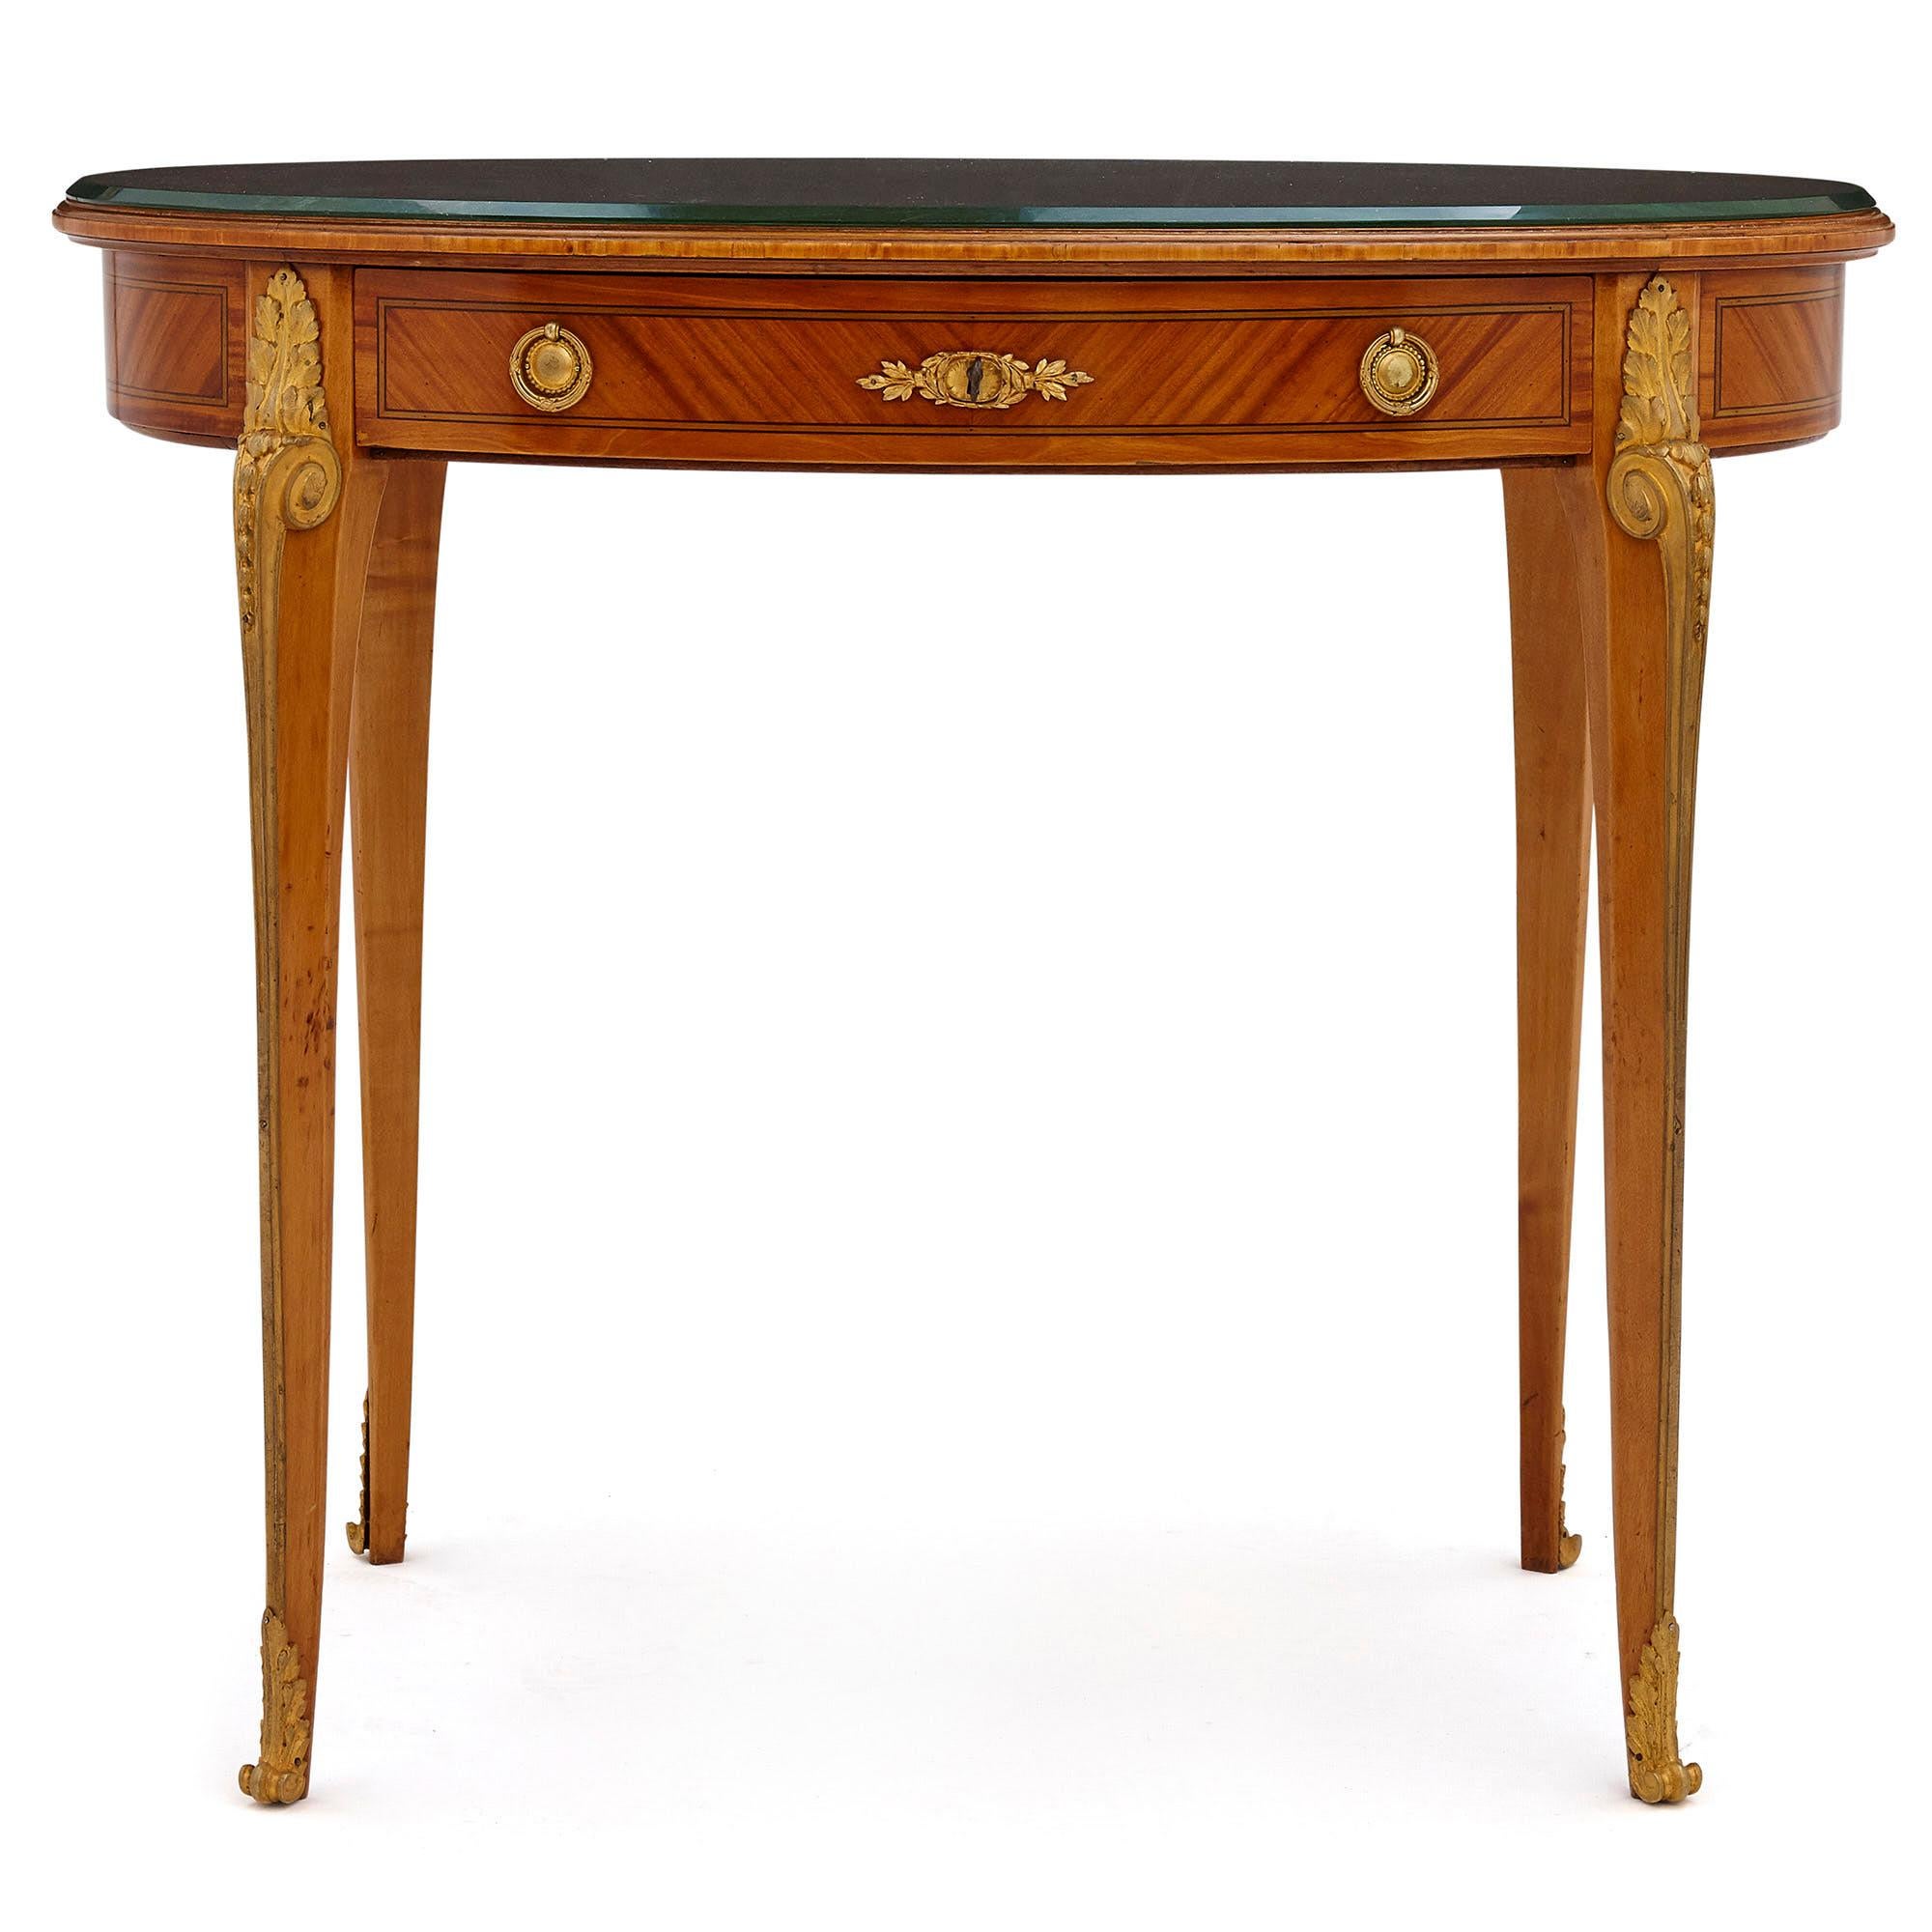 Antique Parisian neoclassical style side table by Au Gros Chêne,
French, late 19th century
Dimensions: Height 75cm, width 90cm, depth 59cm

This elegant oval shaped side table is designed in the late 19th century French Neoclassical style,